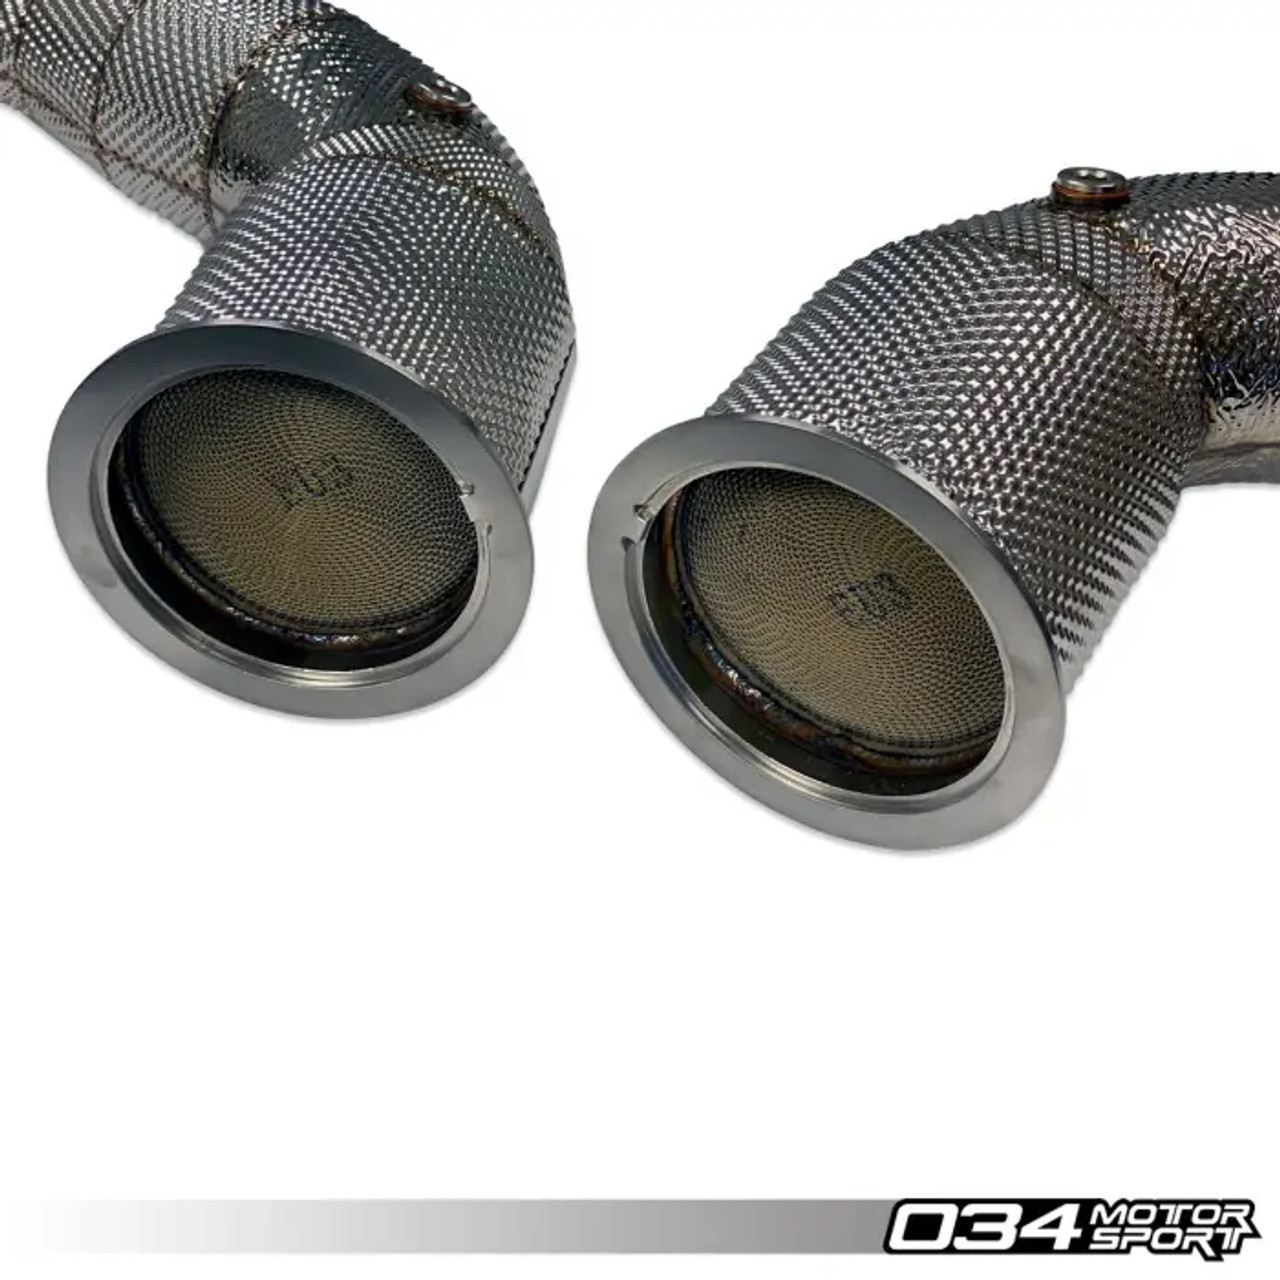 034Motorsport Stainless Steel Racing Catalyst Set for B9 RS5